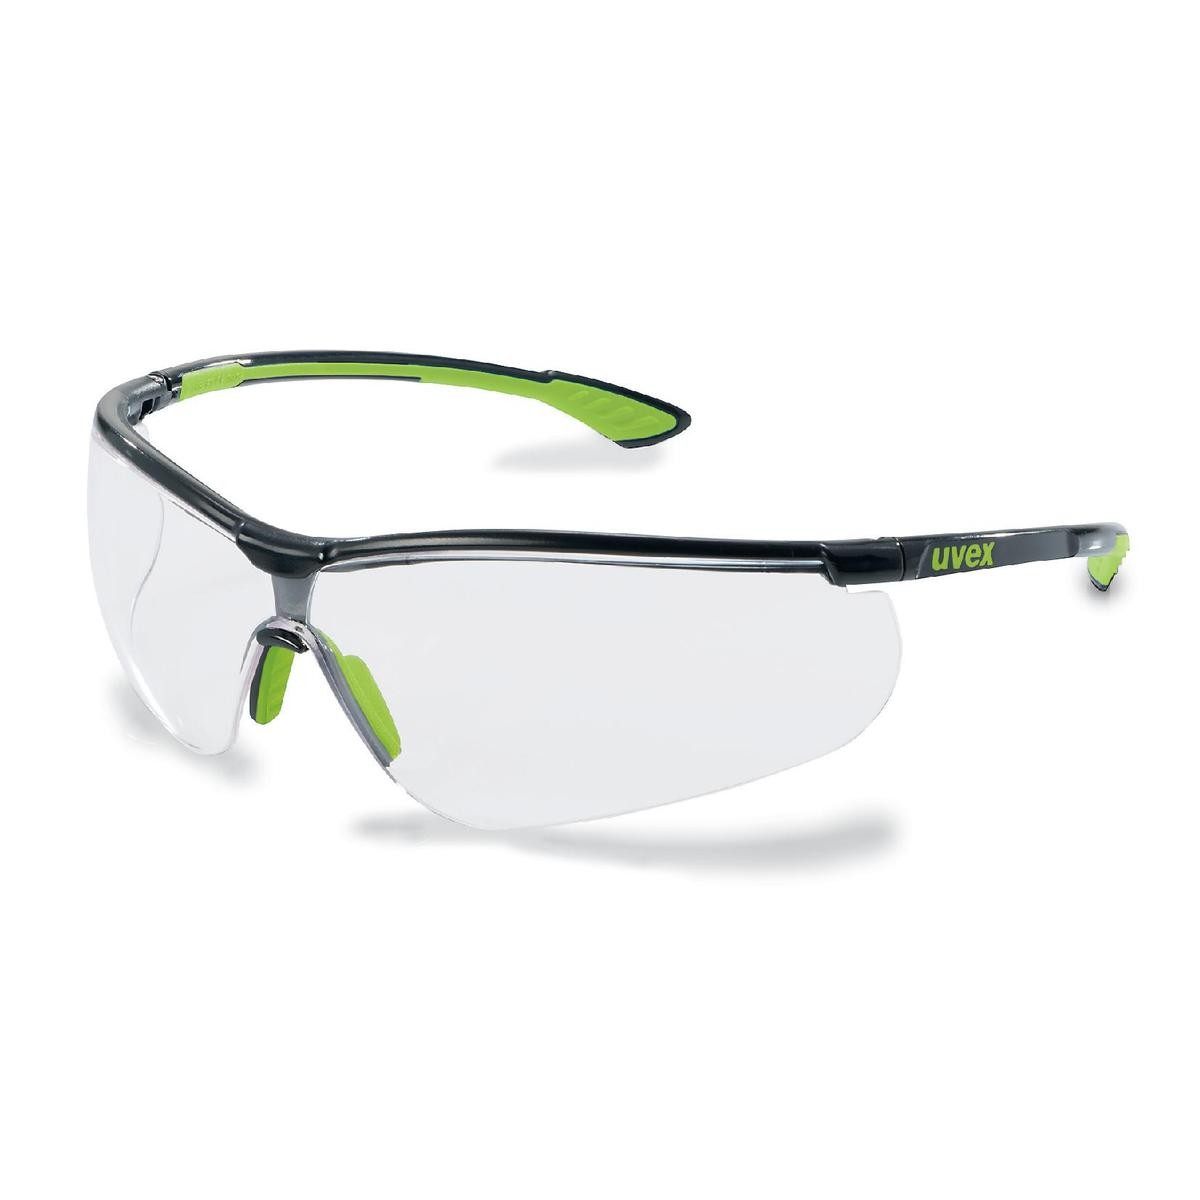 UVEX 9193265 Safety Goggles